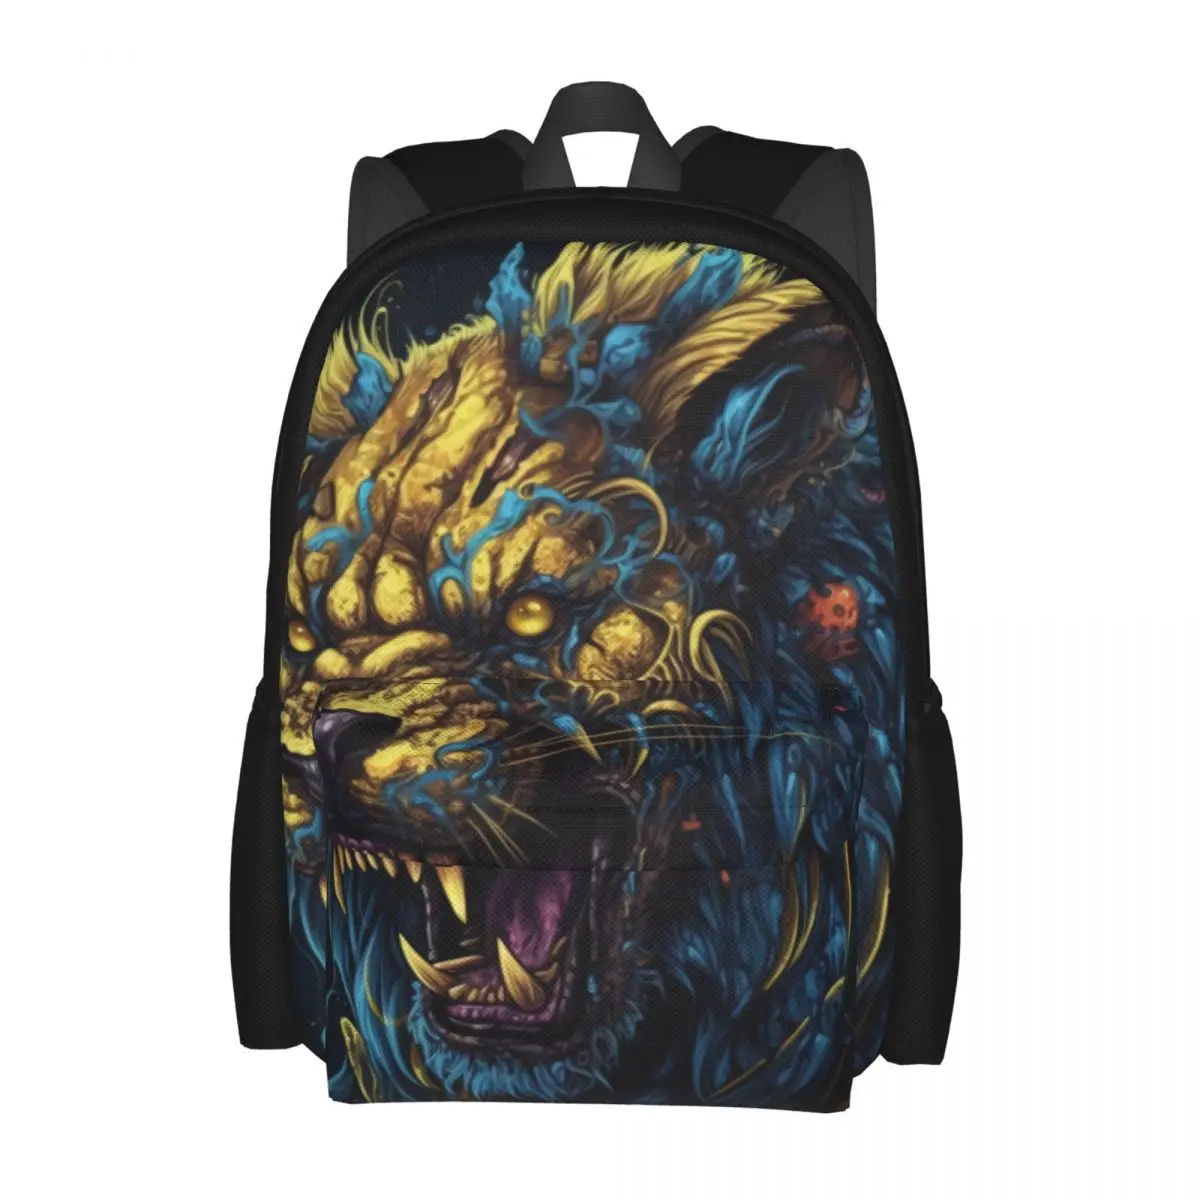 

Lion Backpack Hyper-detailed Zombie Portraits Unisex Polyester College Backpacks Pattern Novelty High School Bags Rucksack